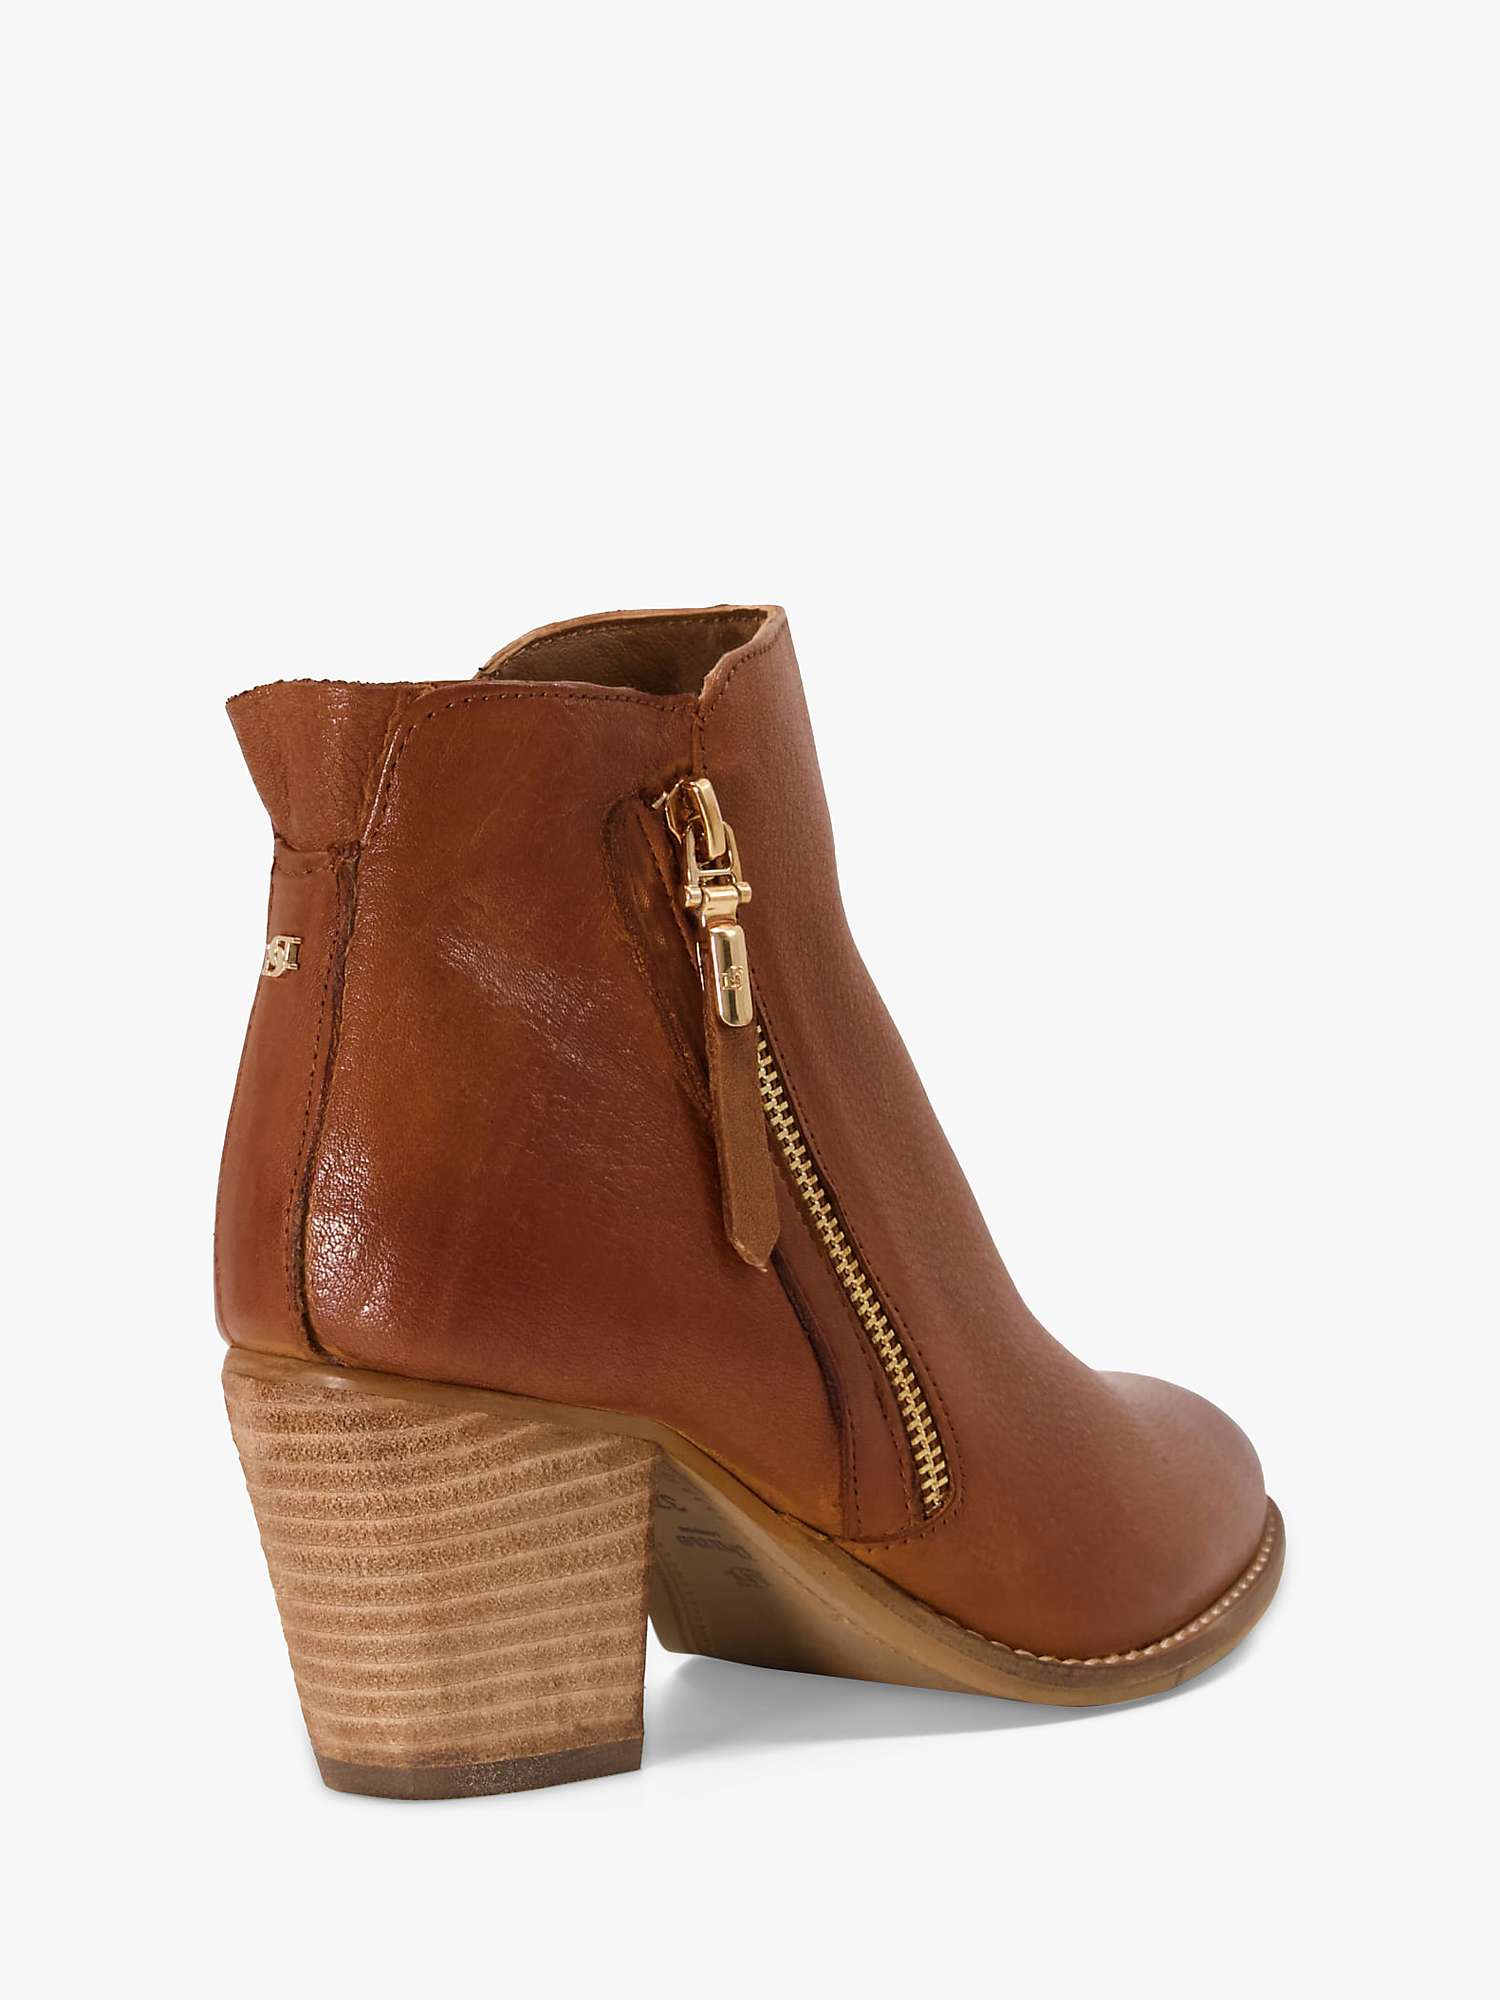 Buy Dune Wide Fit Paice Leather Ankle Boots Online at johnlewis.com